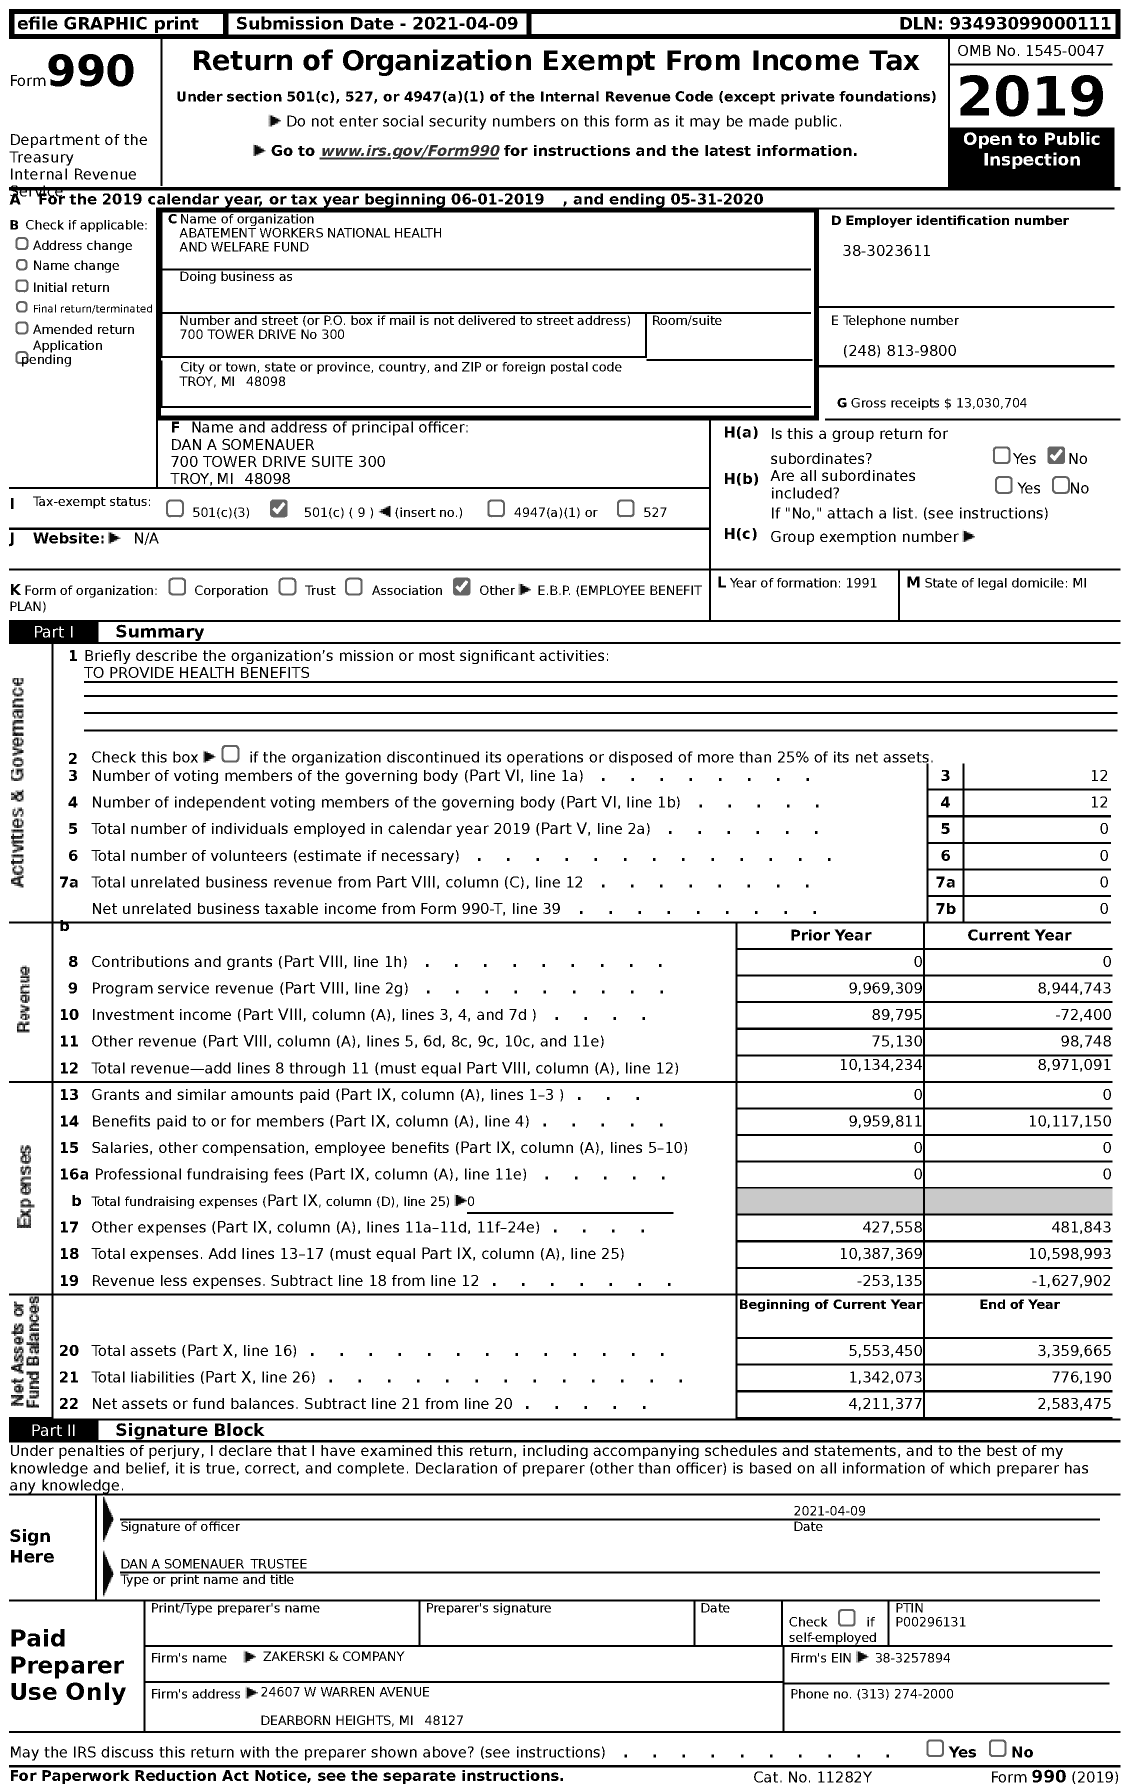 Image of first page of 2019 Form 990 for Abatement Workers National Health and Welfare Fund